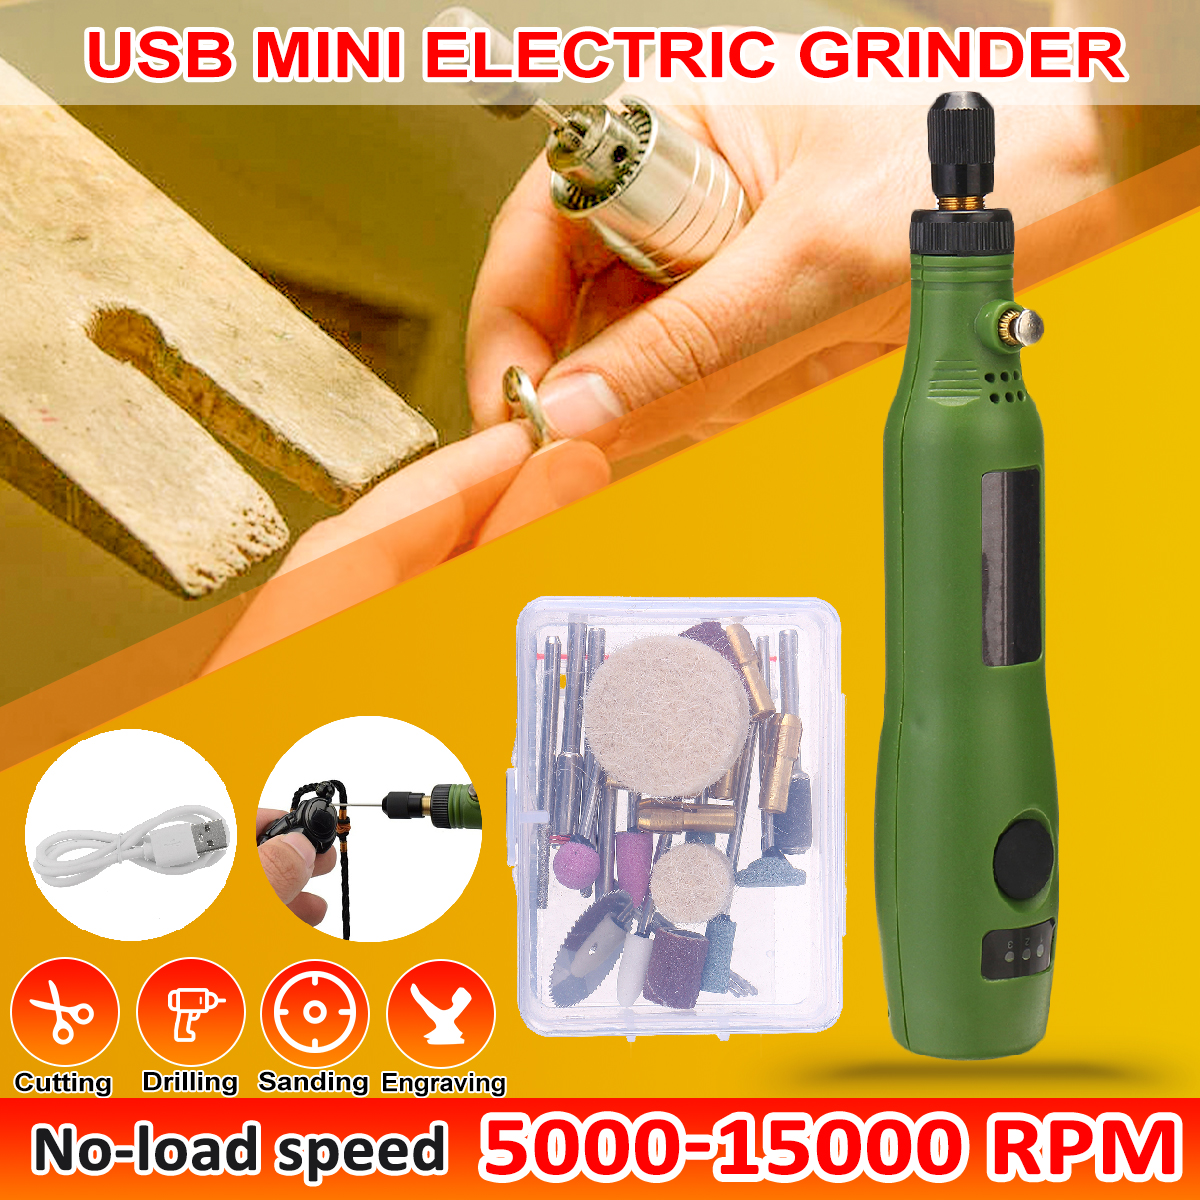 10W-Cordless-Electric-Grinder-Drill-5000-15000rpm-USB-Rotary-Tool-Drill-3-Gears-Grinder-Pen-Engravin-1621850-2